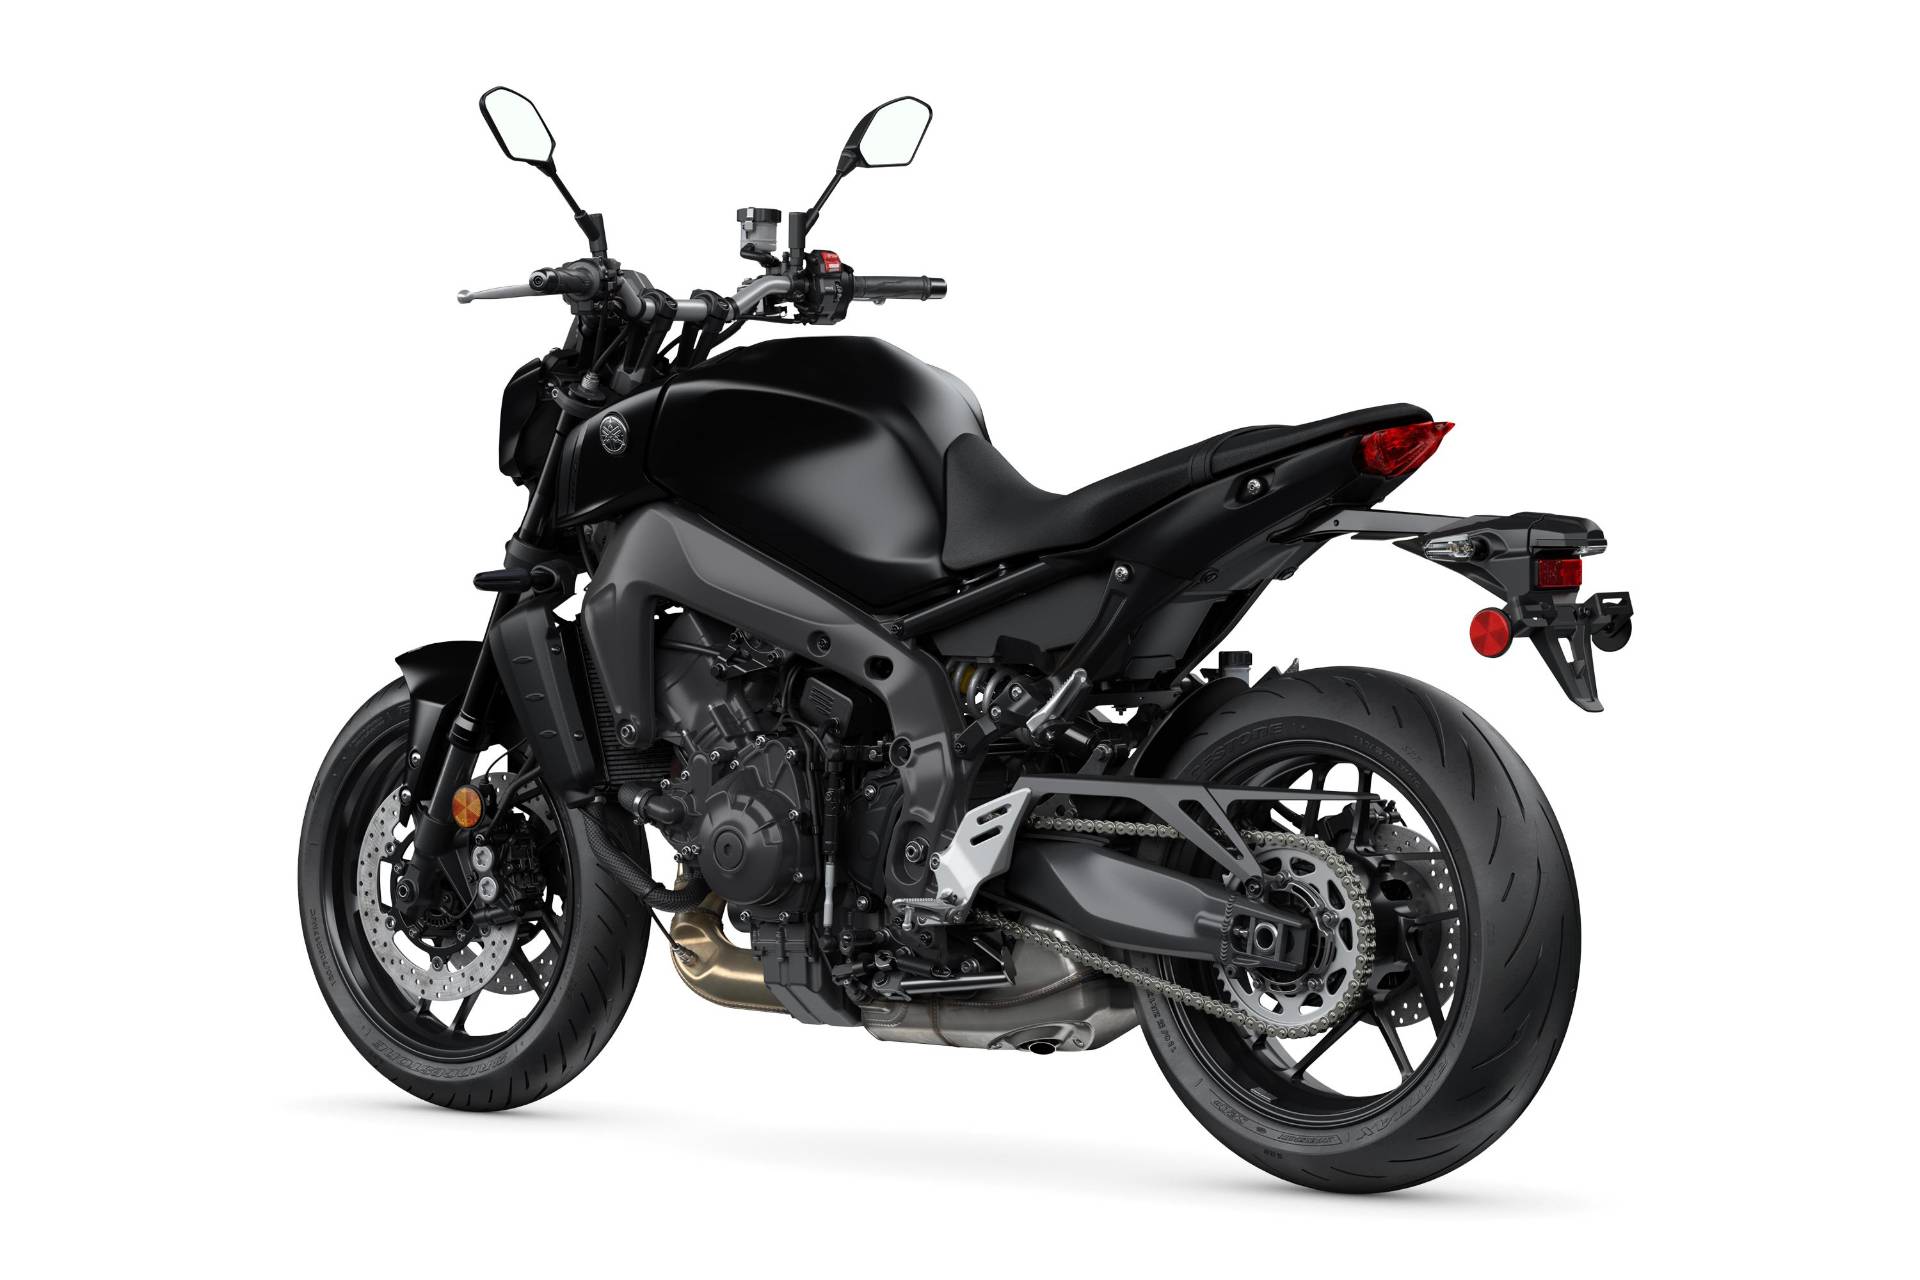 New 2021 Yamaha MT-07 Motorcycles in Clearwater, FL 